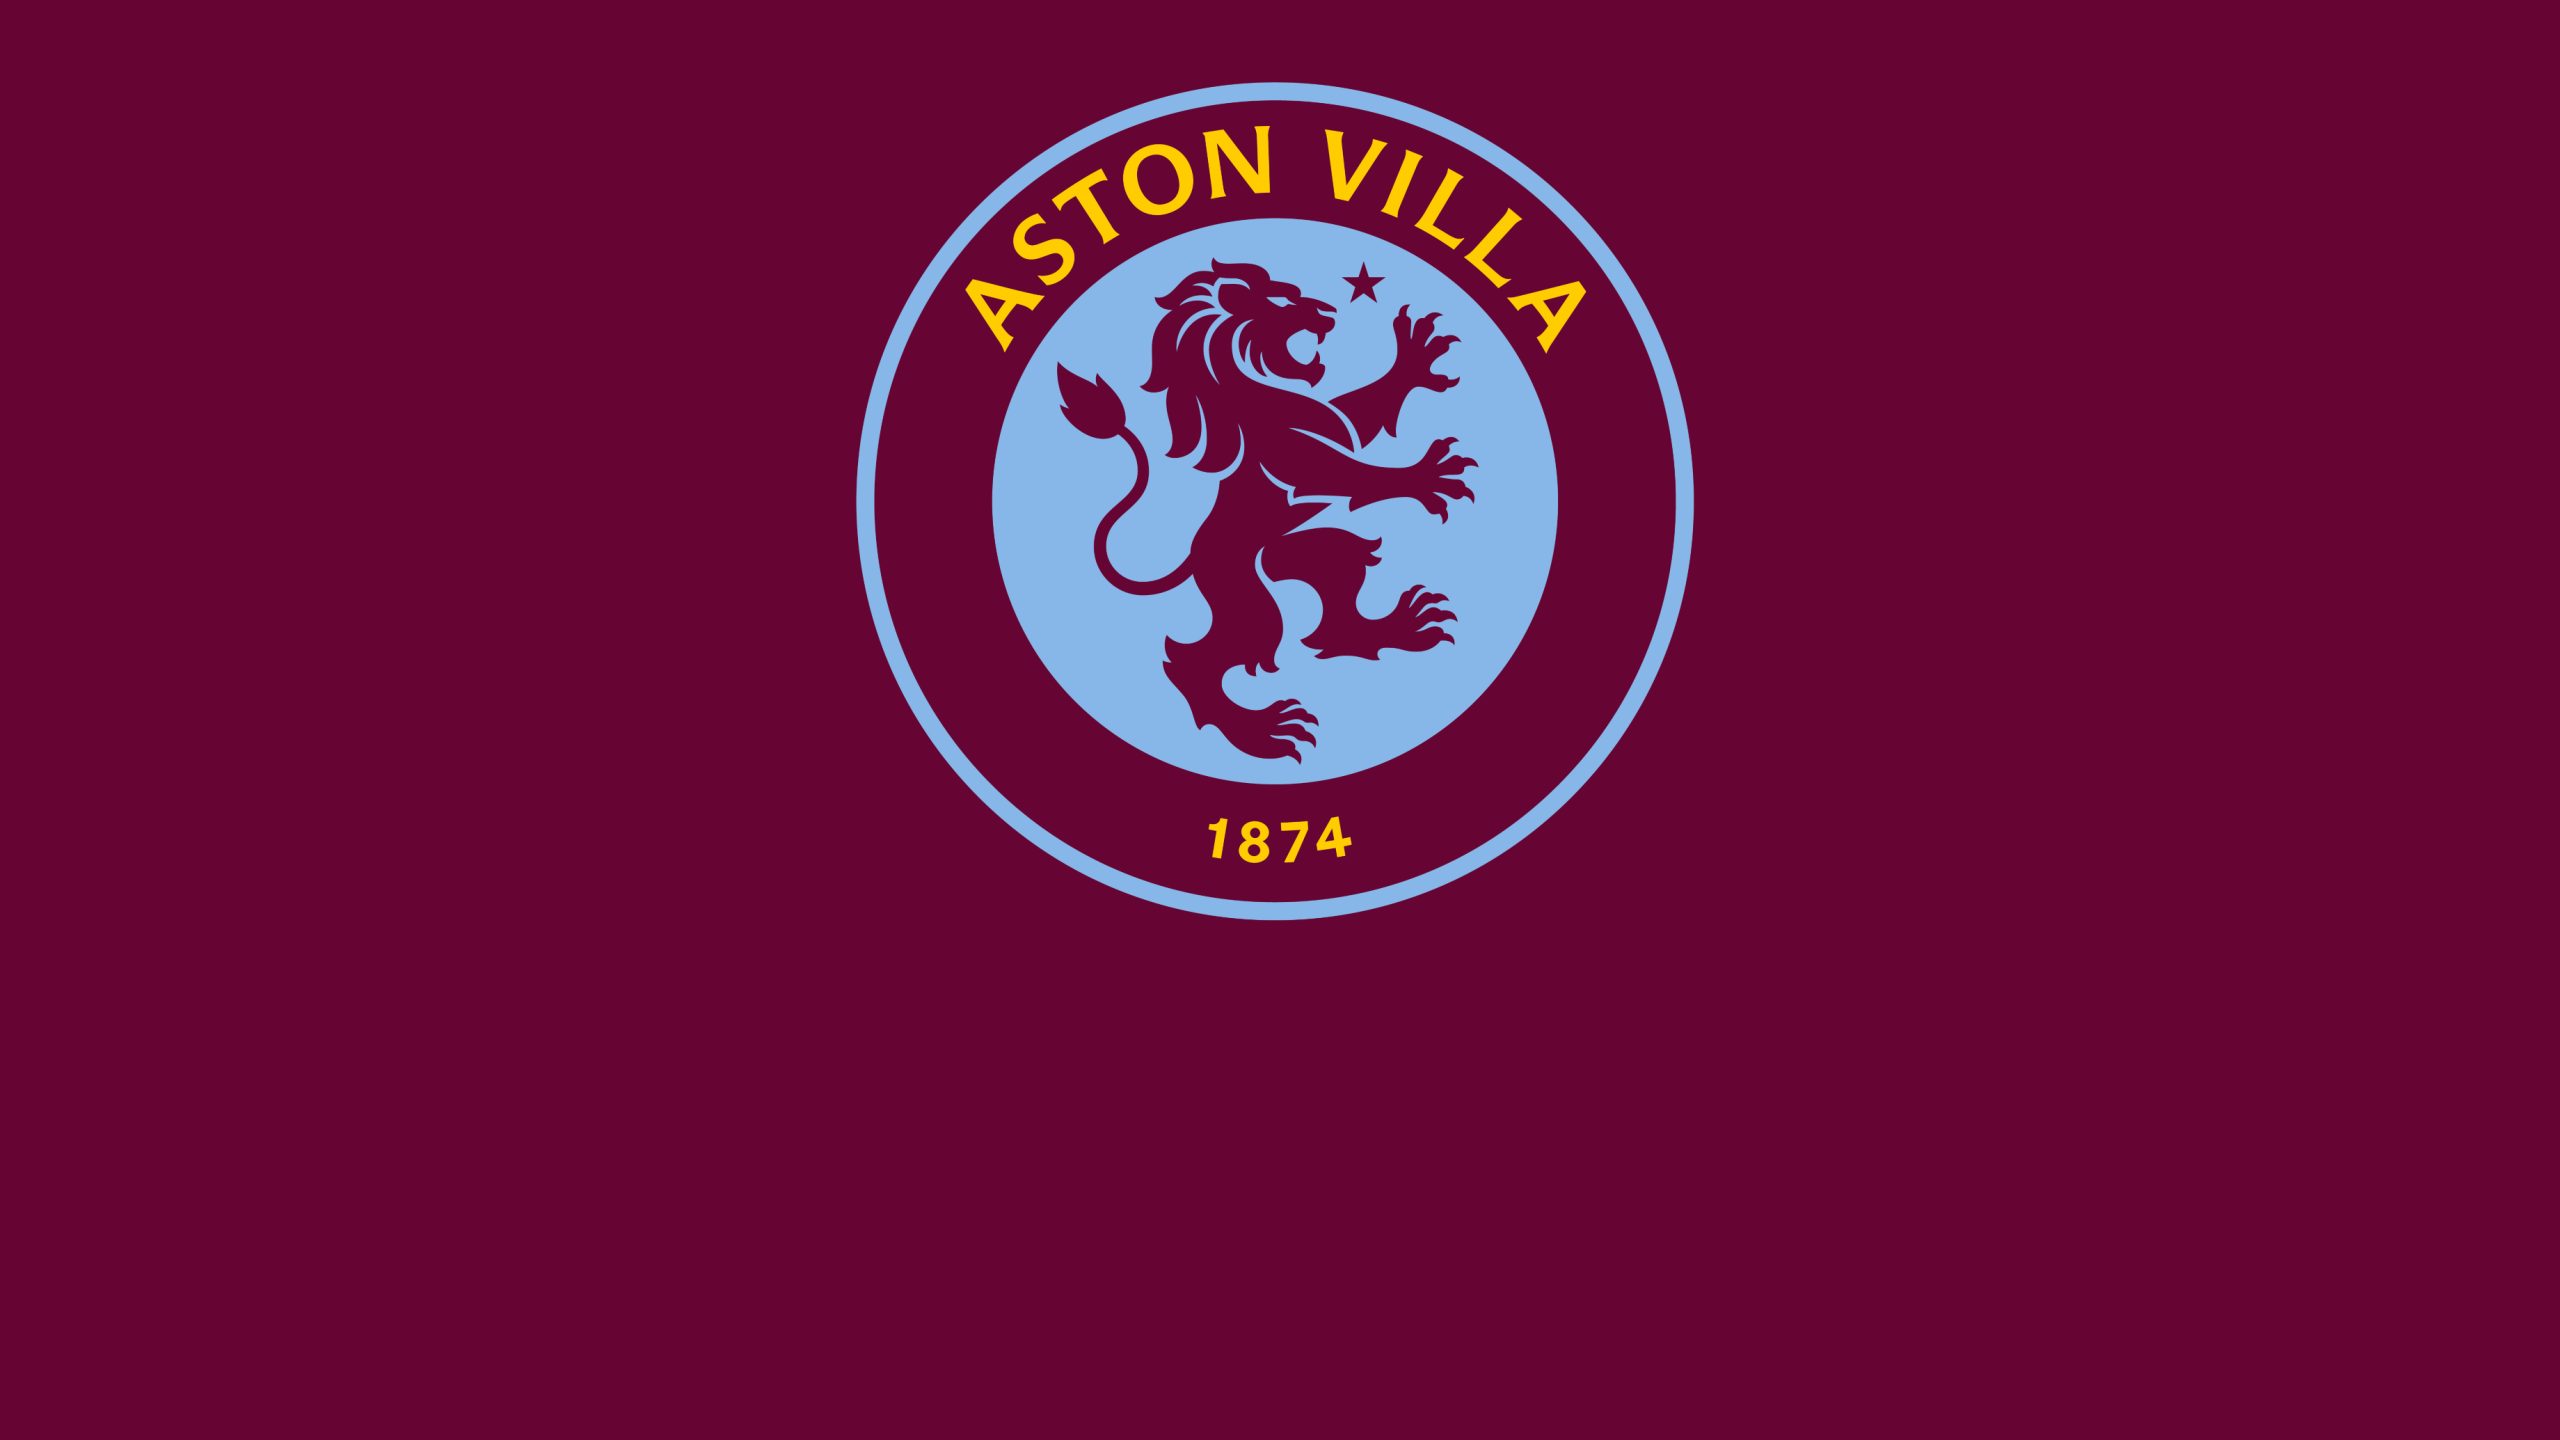 Aston Villa 202324 Players, Squad, World Rankings, History, and more